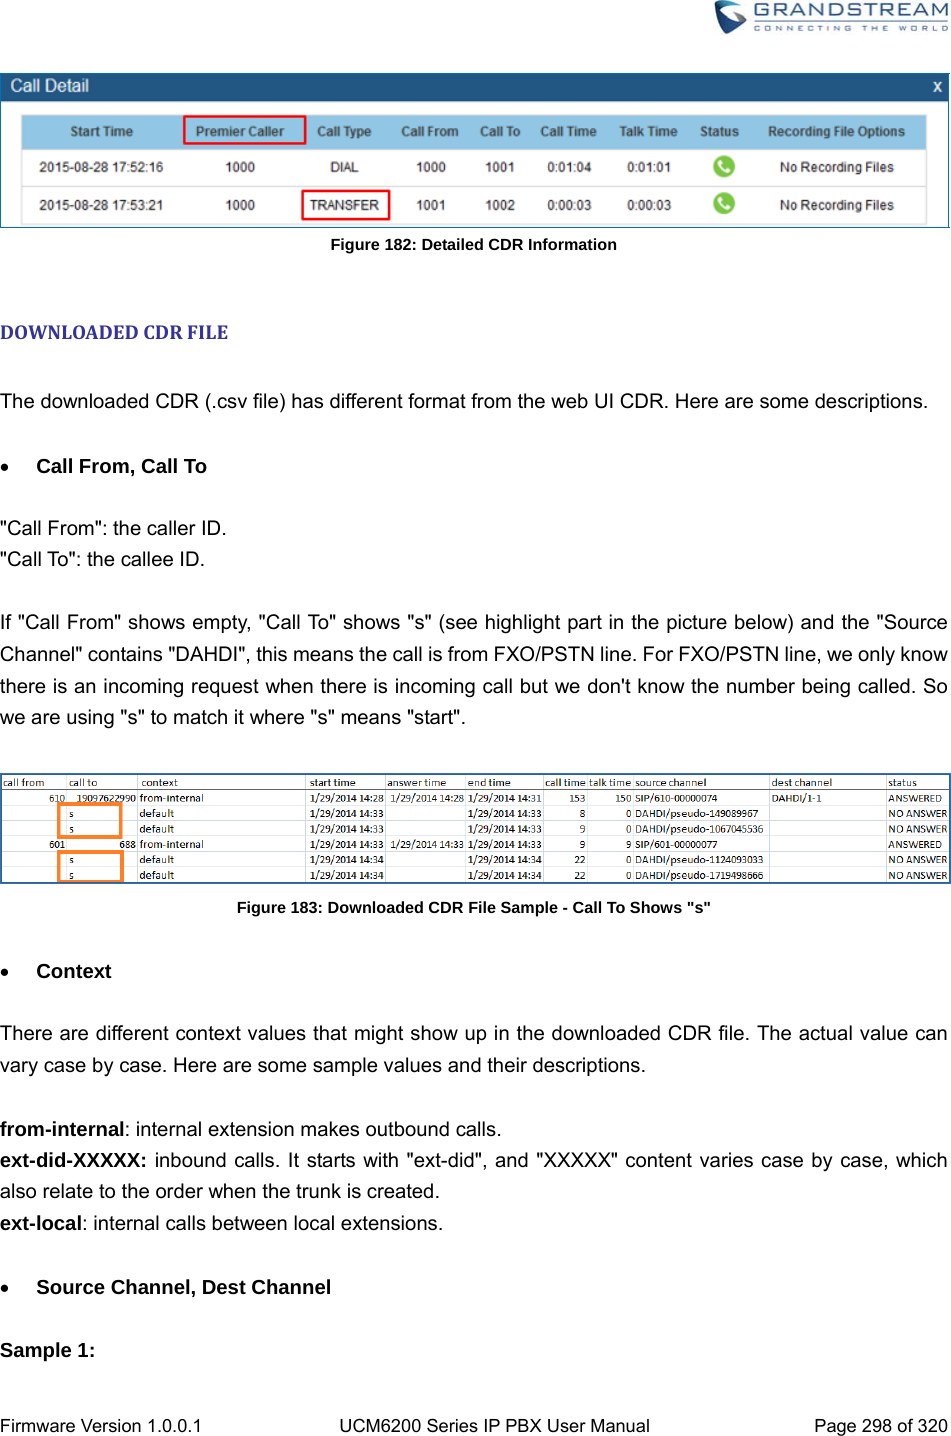  Firmware Version 1.0.0.1  UCM6200 Series IP PBX User Manual  Page 298 of 320  Figure 182: Detailed CDR Information  DOWNLOADEDCDRFILE The downloaded CDR (.csv file) has different format from the web UI CDR. Here are some descriptions.   Call From, Call To  &quot;Call From&quot;: the caller ID. &quot;Call To&quot;: the callee ID.  If &quot;Call From&quot; shows empty, &quot;Call To&quot; shows &quot;s&quot; (see highlight part in the picture below) and the &quot;Source Channel&quot; contains &quot;DAHDI&quot;, this means the call is from FXO/PSTN line. For FXO/PSTN line, we only know there is an incoming request when there is incoming call but we don&apos;t know the number being called. So we are using &quot;s&quot; to match it where &quot;s&quot; means &quot;start&quot;.   Figure 183: Downloaded CDR File Sample - Call To Shows &quot;s&quot;   Context  There are different context values that might show up in the downloaded CDR file. The actual value can vary case by case. Here are some sample values and their descriptions.  from-internal: internal extension makes outbound calls. ext-did-XXXXX: inbound calls. It starts with &quot;ext-did&quot;, and &quot;XXXXX&quot; content varies case by case, which also relate to the order when the trunk is created. ext-local: internal calls between local extensions.   Source Channel, Dest Channel  Sample 1: 